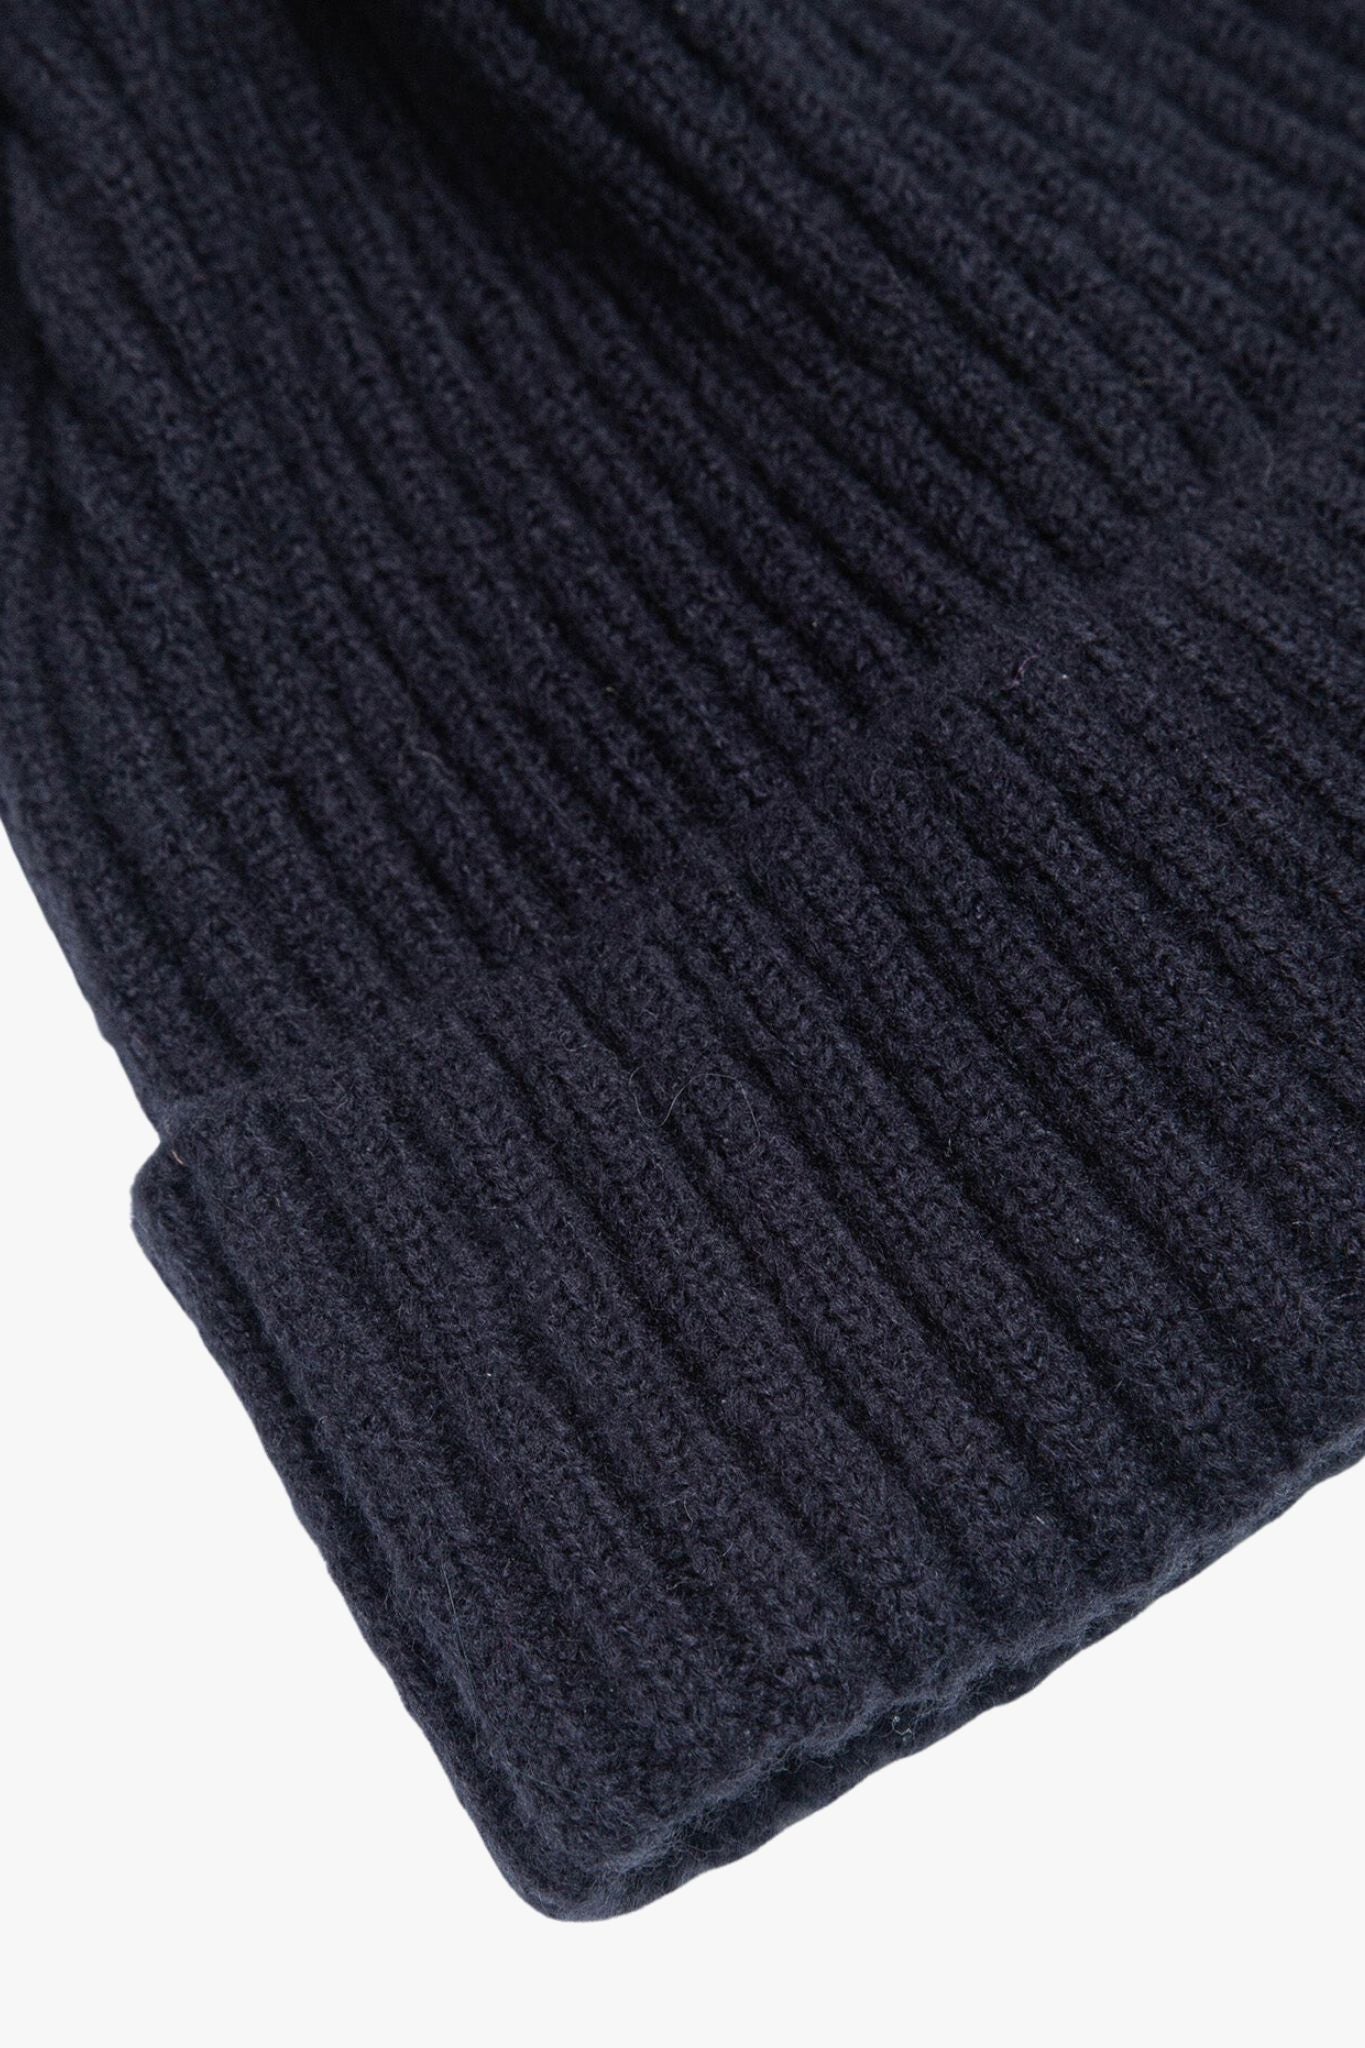 close up of the ribbed knitted fabric